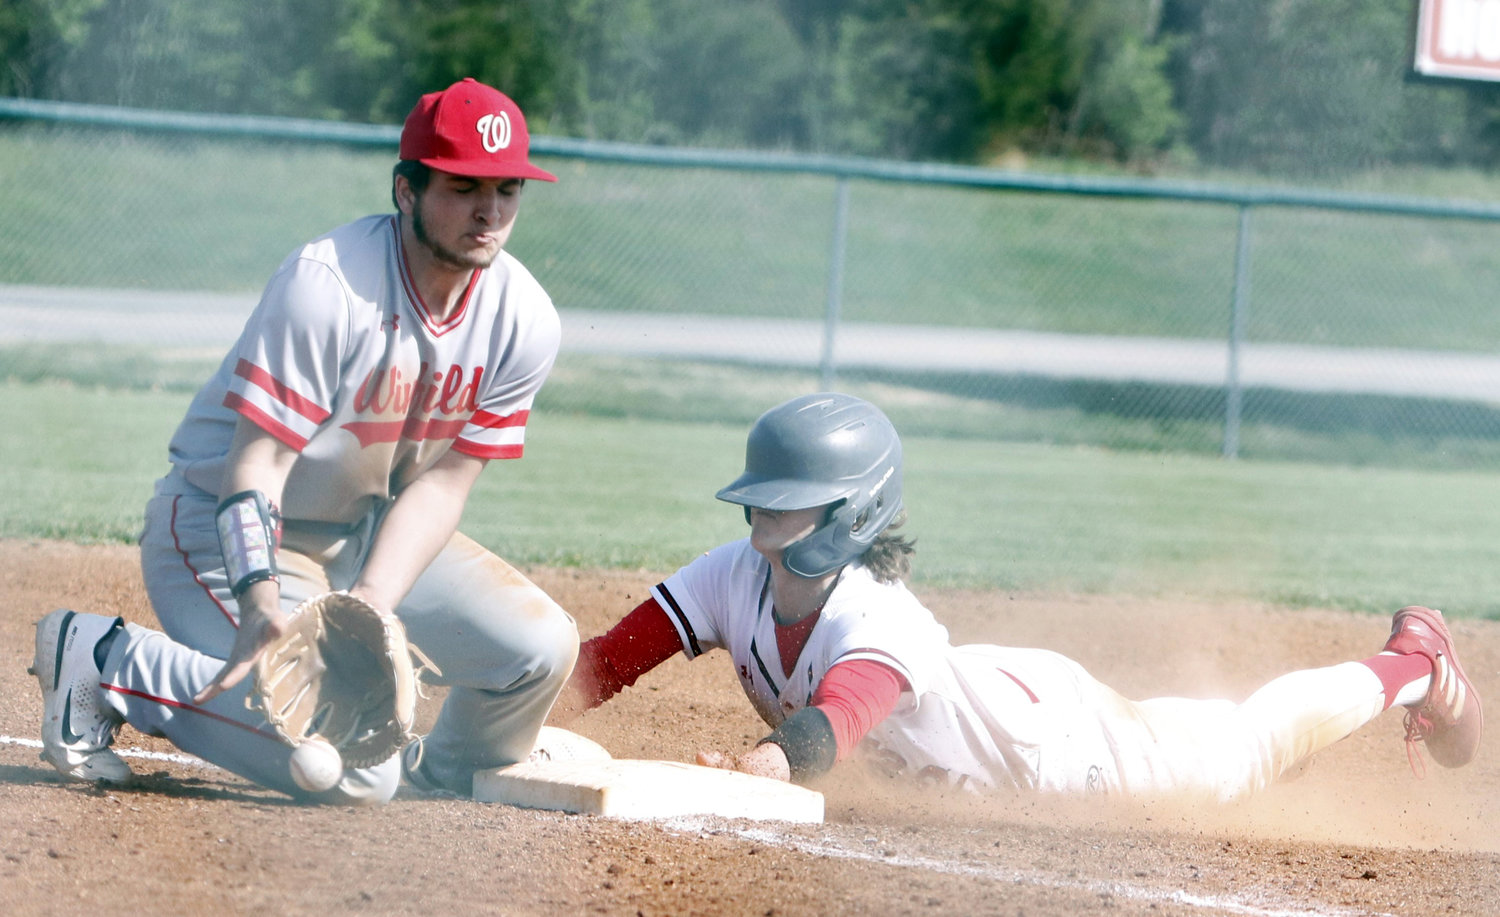 Warrenton senior Kannon Hibbs (right) dives safely into third base during the fifth inning of Warrenton’s 8-1 win over Winfield Friday.  Hibbs was ruled safe on the play and scored later in the inning.